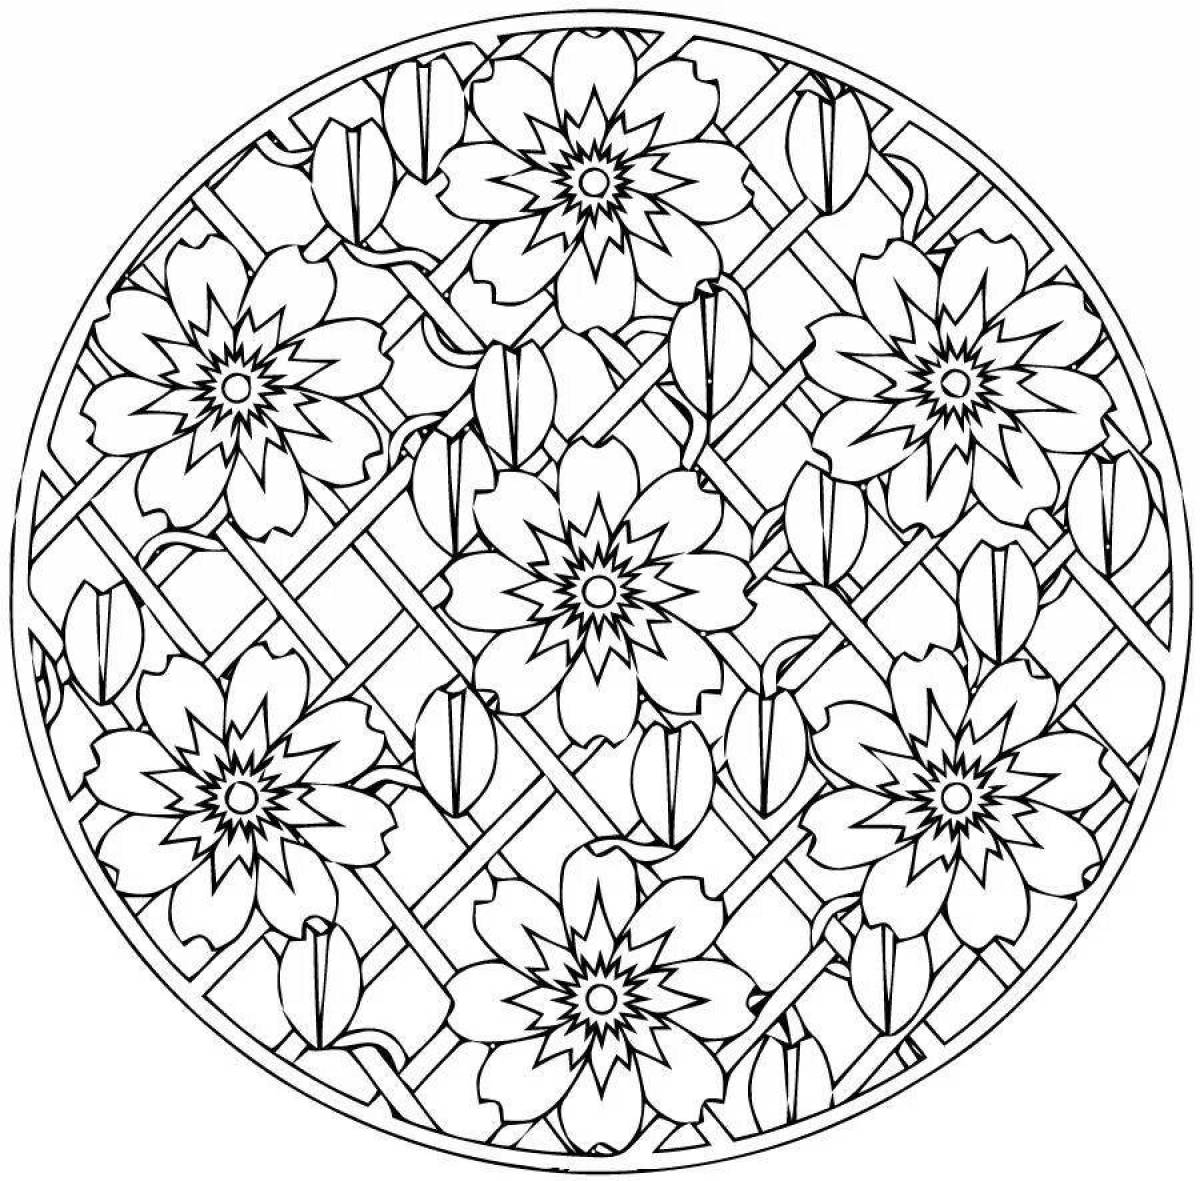 Coloring book with bright plate